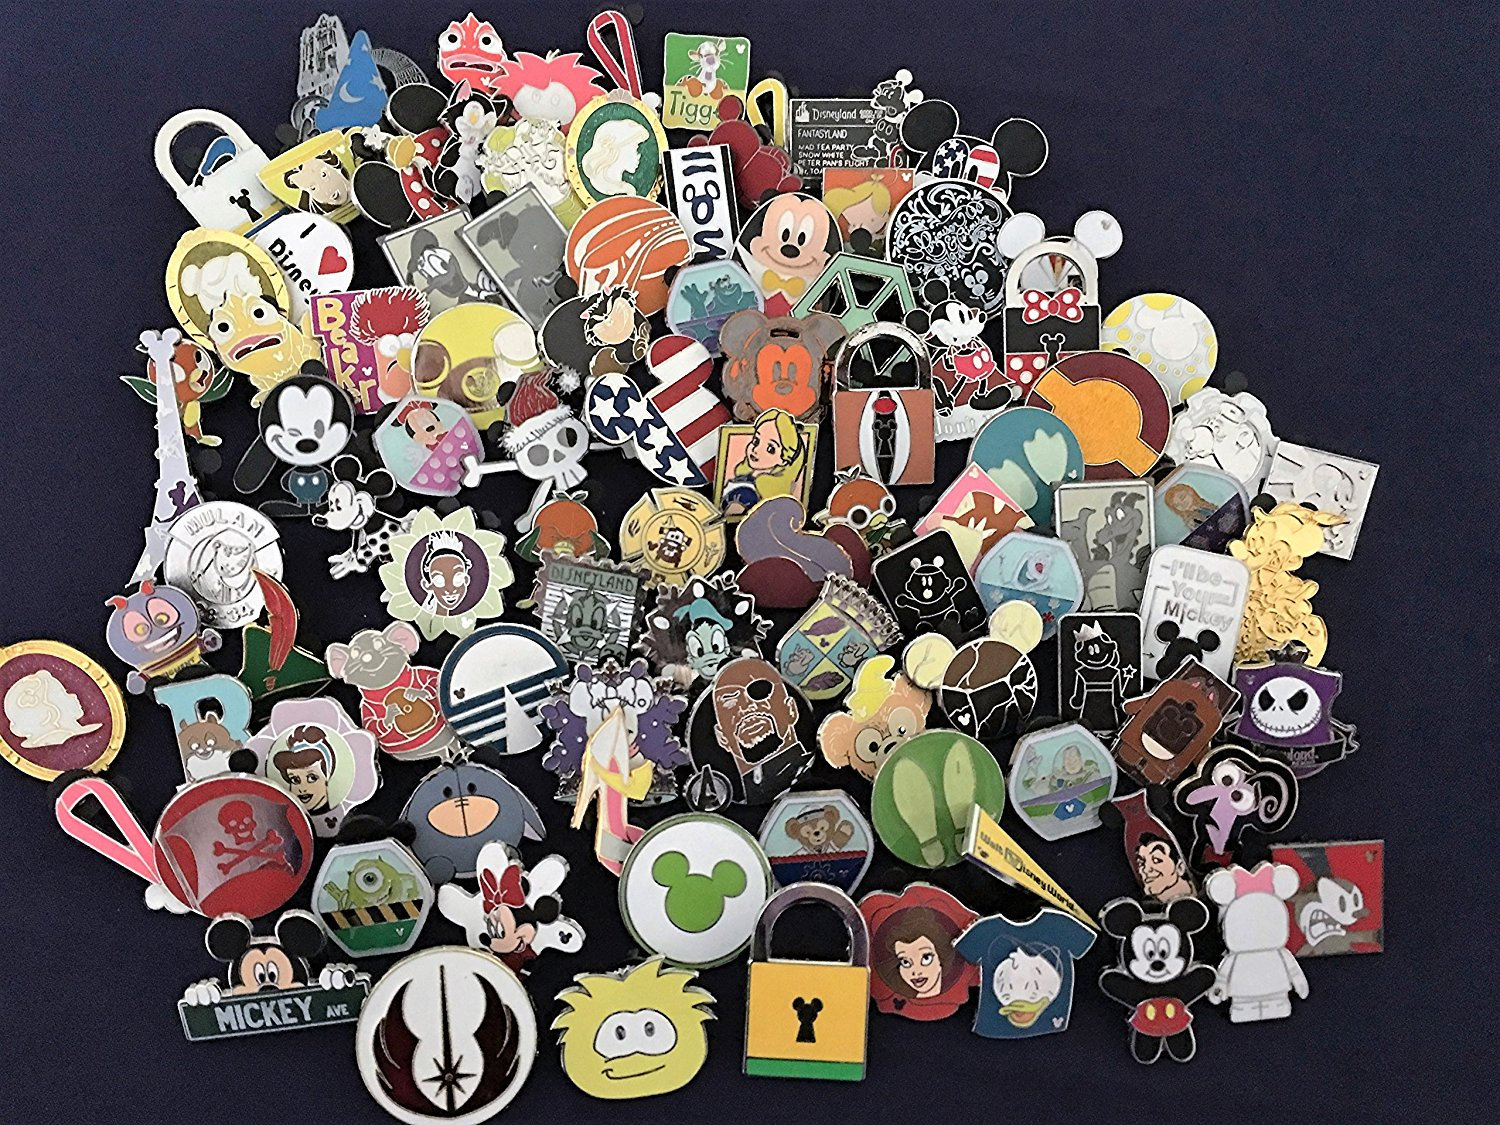 Disney Pin Trading 25 Girl Assorted Pin Lot - NEW Pins - No Doubles -  Tradeable